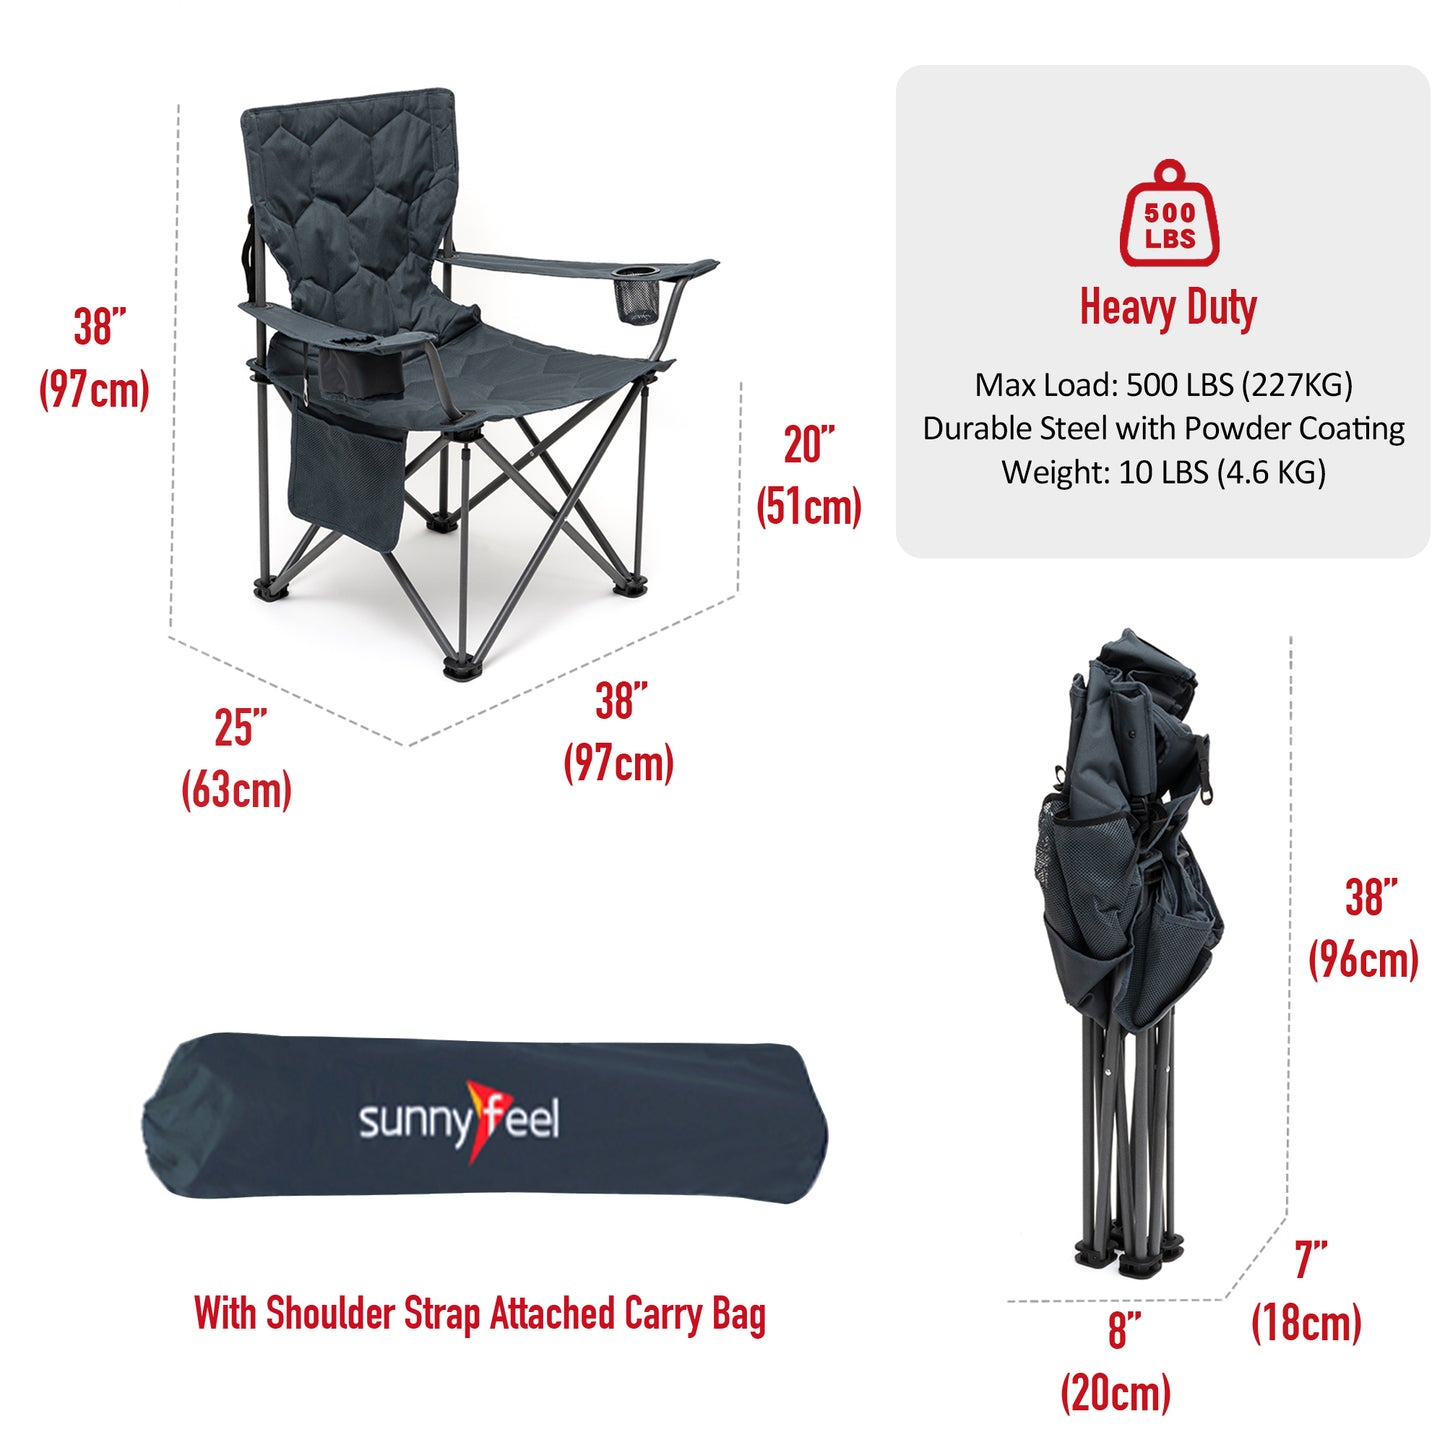 SUNNYFEEL Dark Gray Color XL Oversized Camping Chair, Folding Camp Chairs for Adults Heavy Duty Big Tall 500 LBS, Padded Portable Quad Arm Lawn Chair with Pocket for Outdoor/Picnic/Beach/Sports